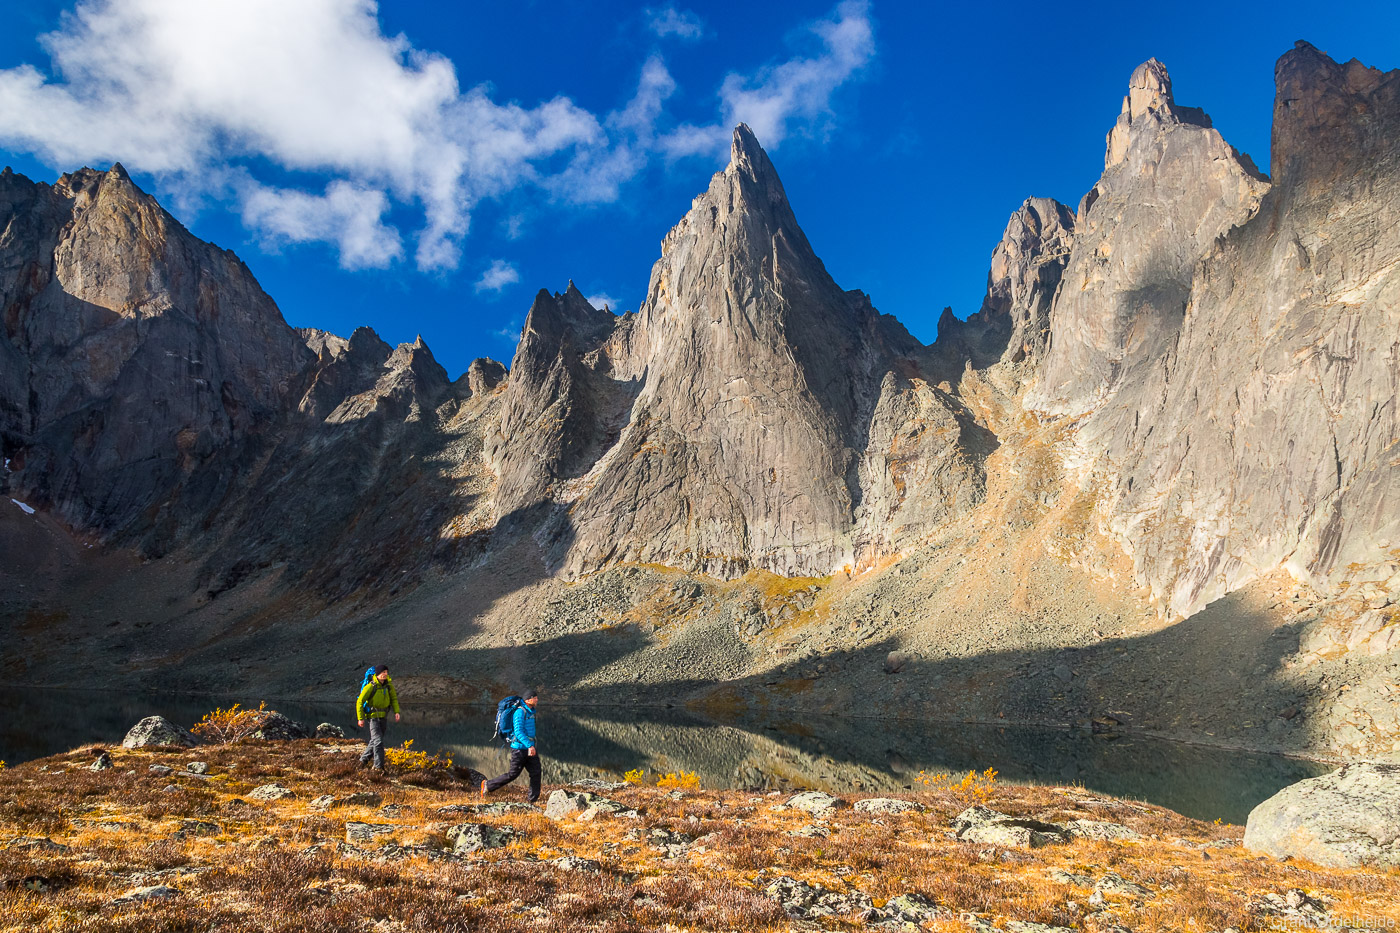 A pair of backpackers below rugged peaks deep in the backcountry of Tombstone Territorial Park located in Canada's Yukon Territory...